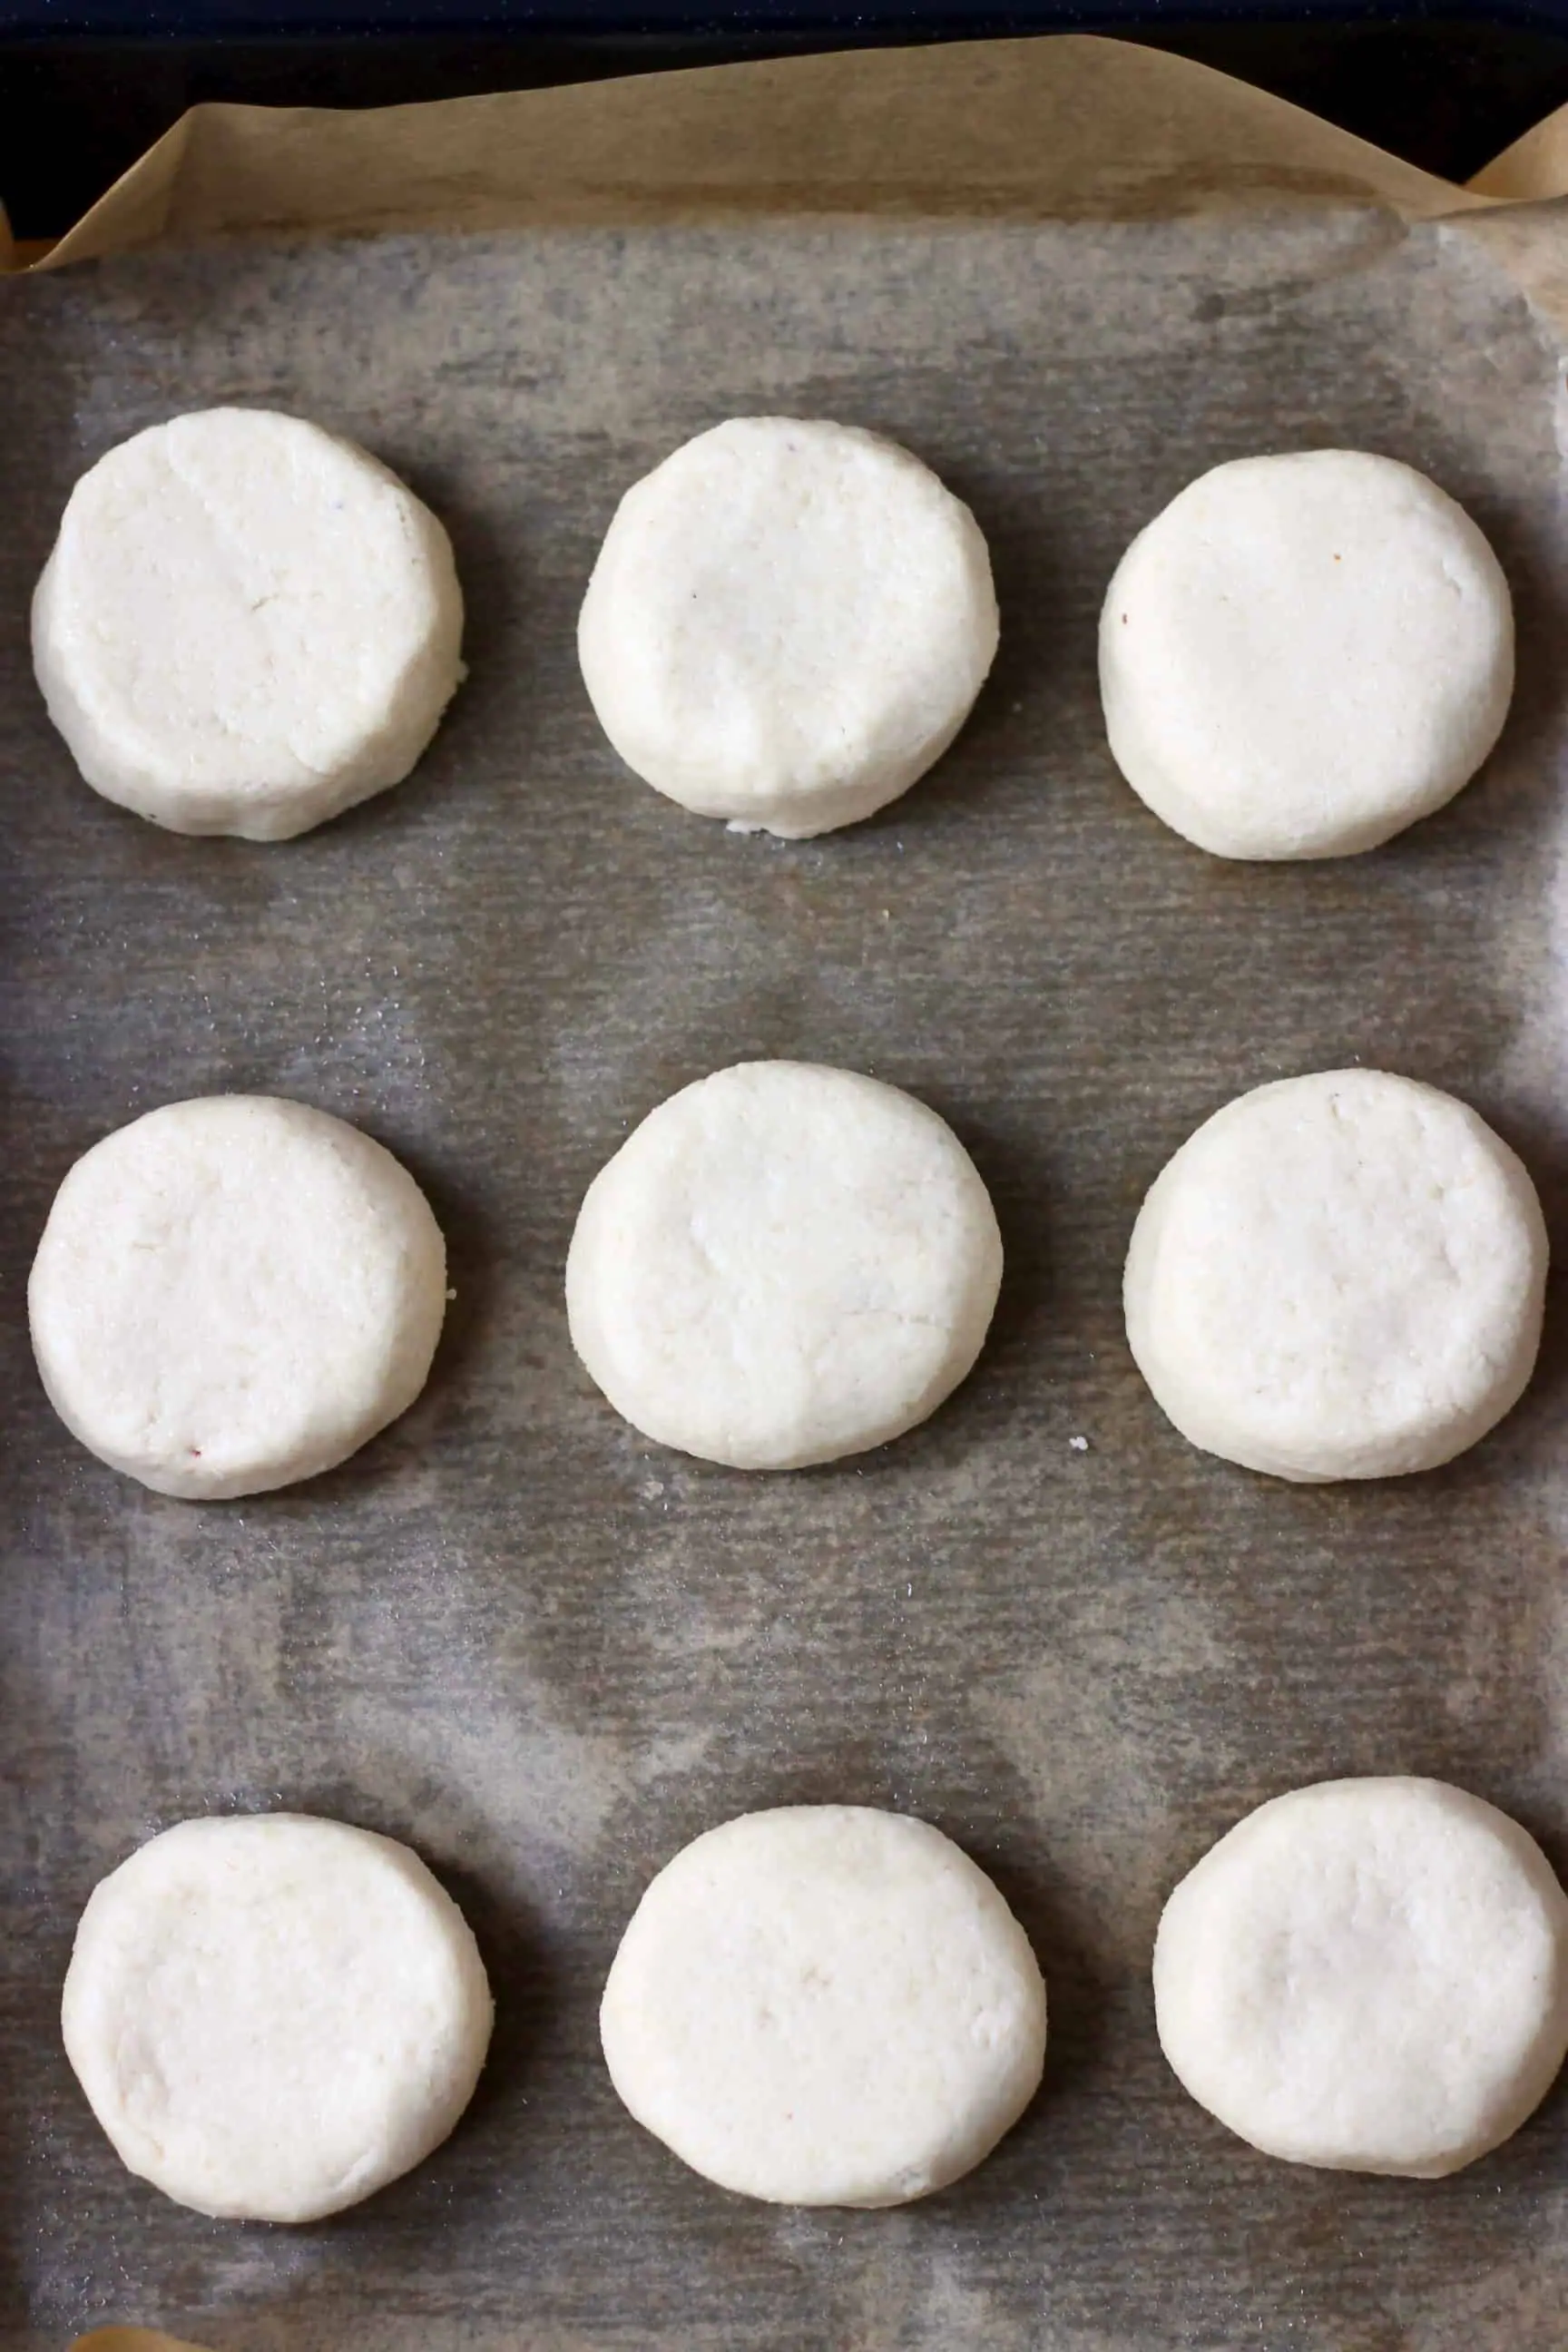 Nine raw gluten-free vegan scones on a baking tray lined with baking paper